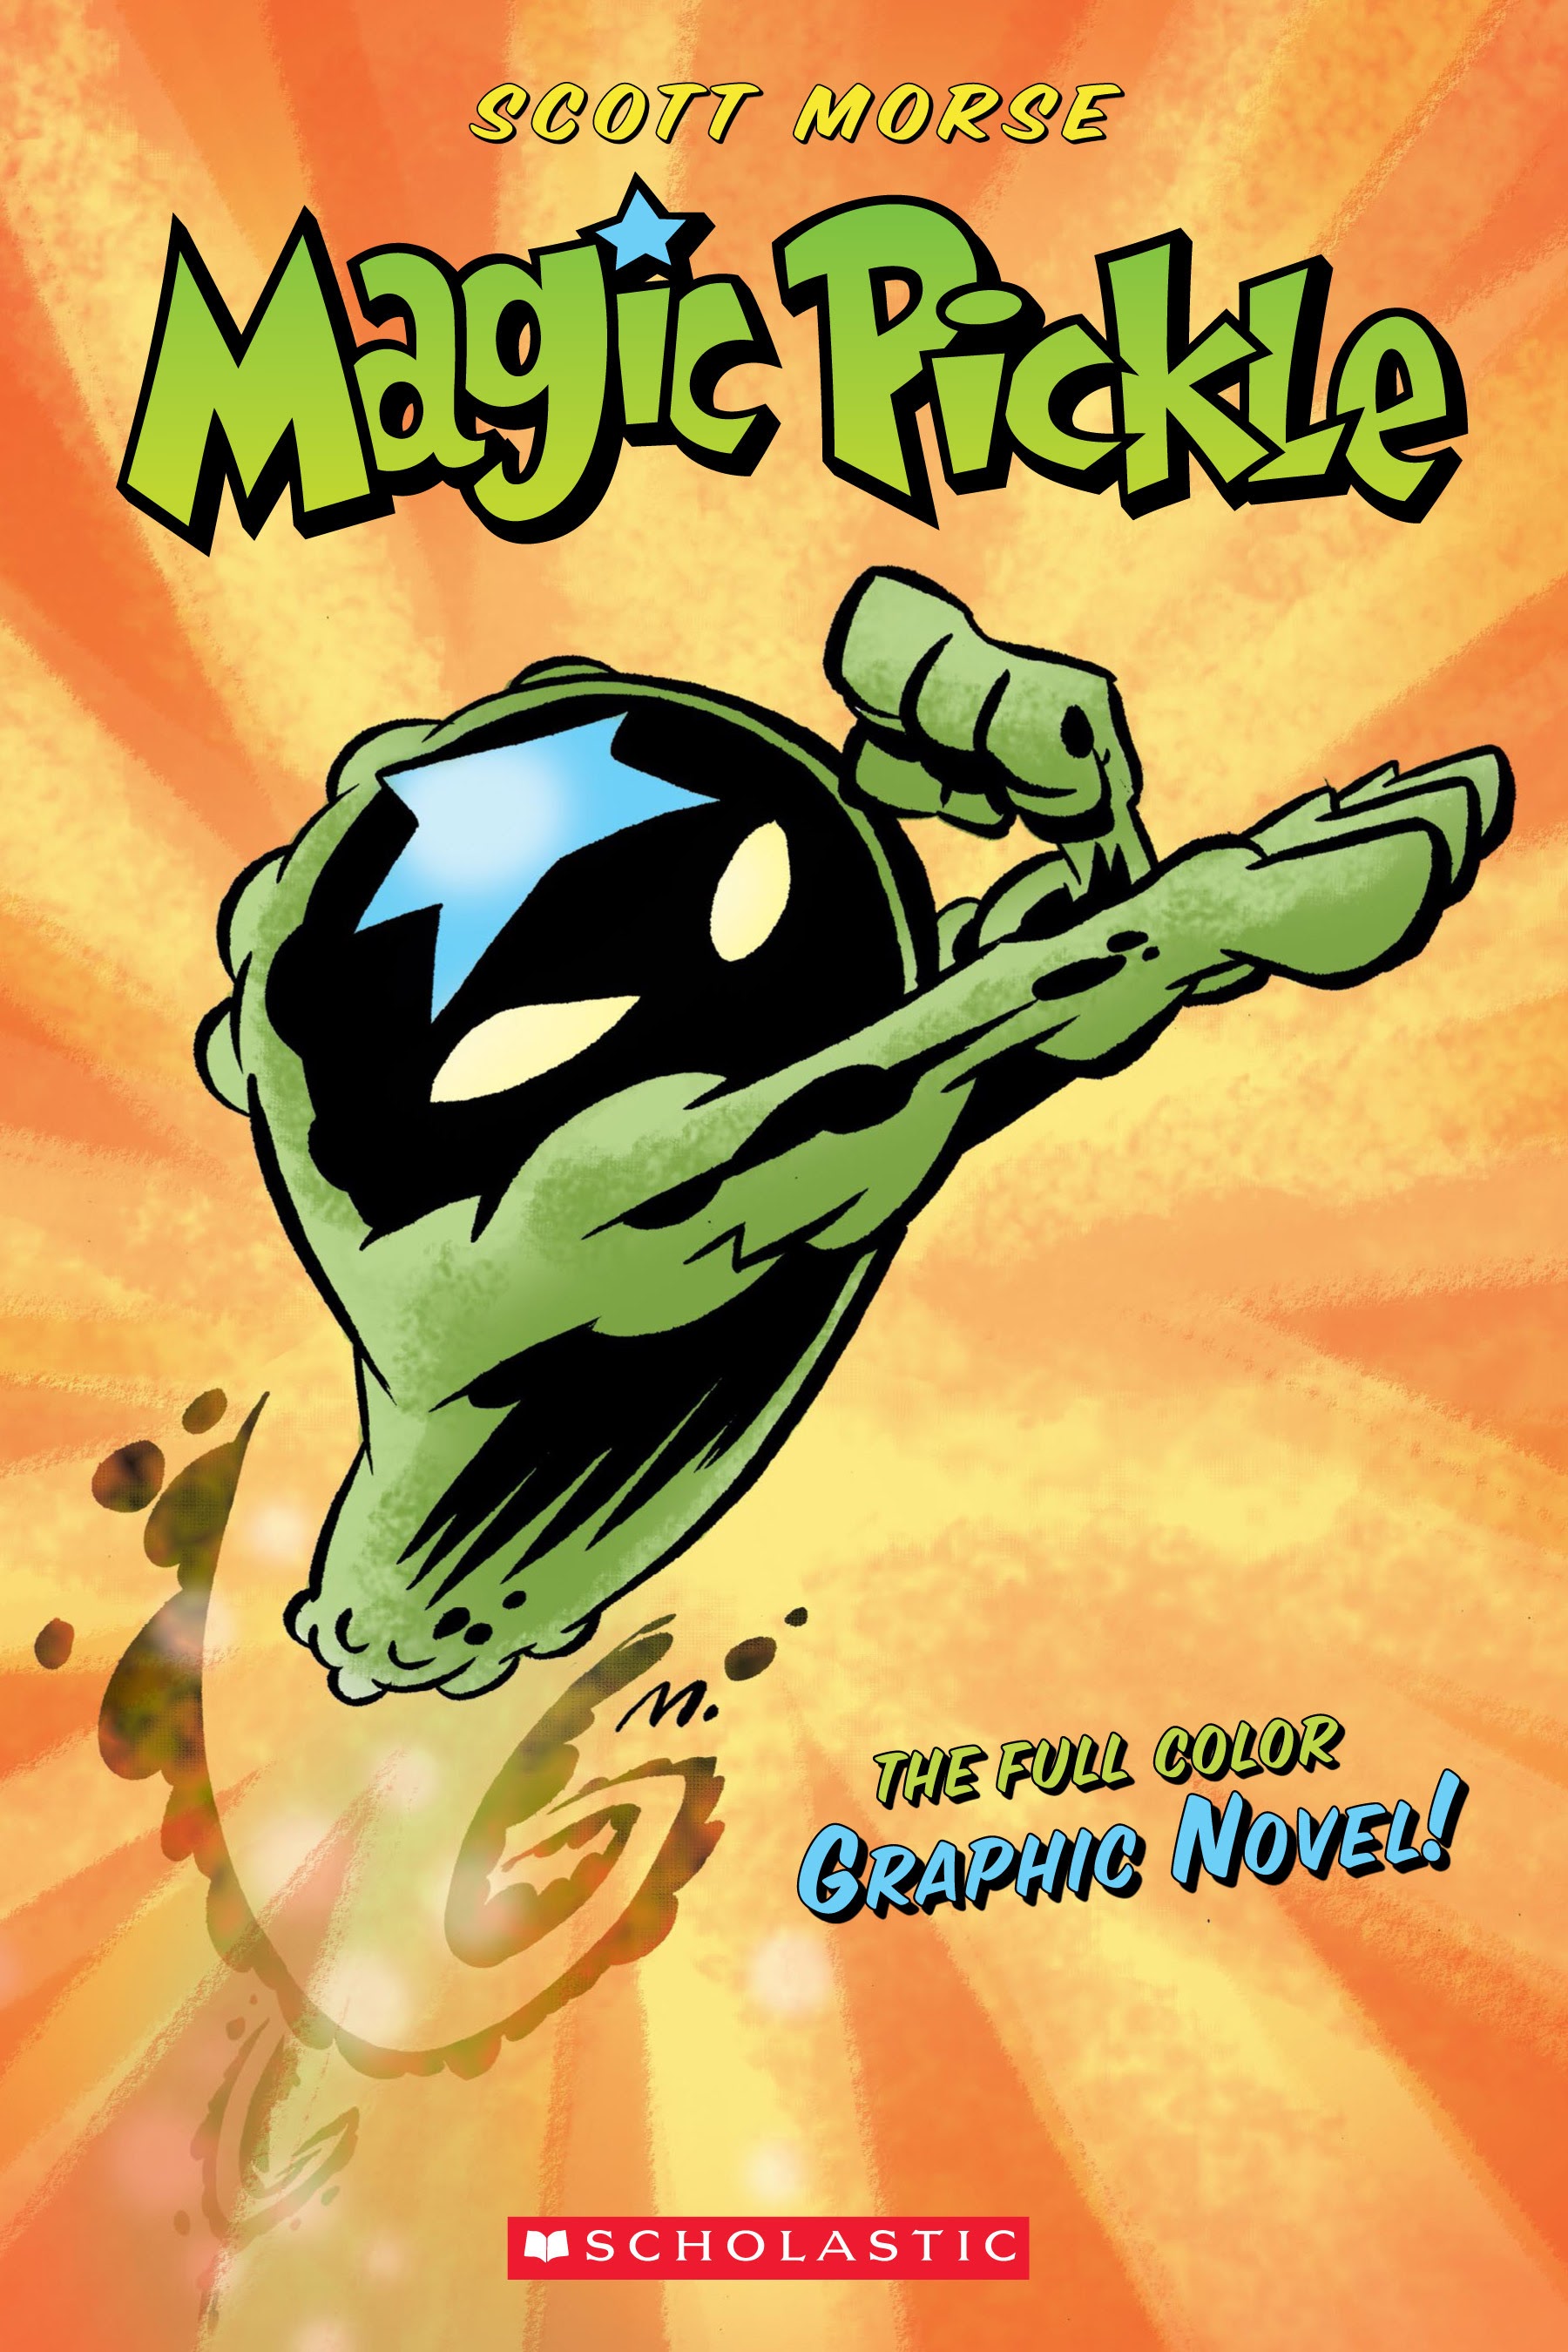 Read online Magic Pickle comic -  Issue # TPB - 1